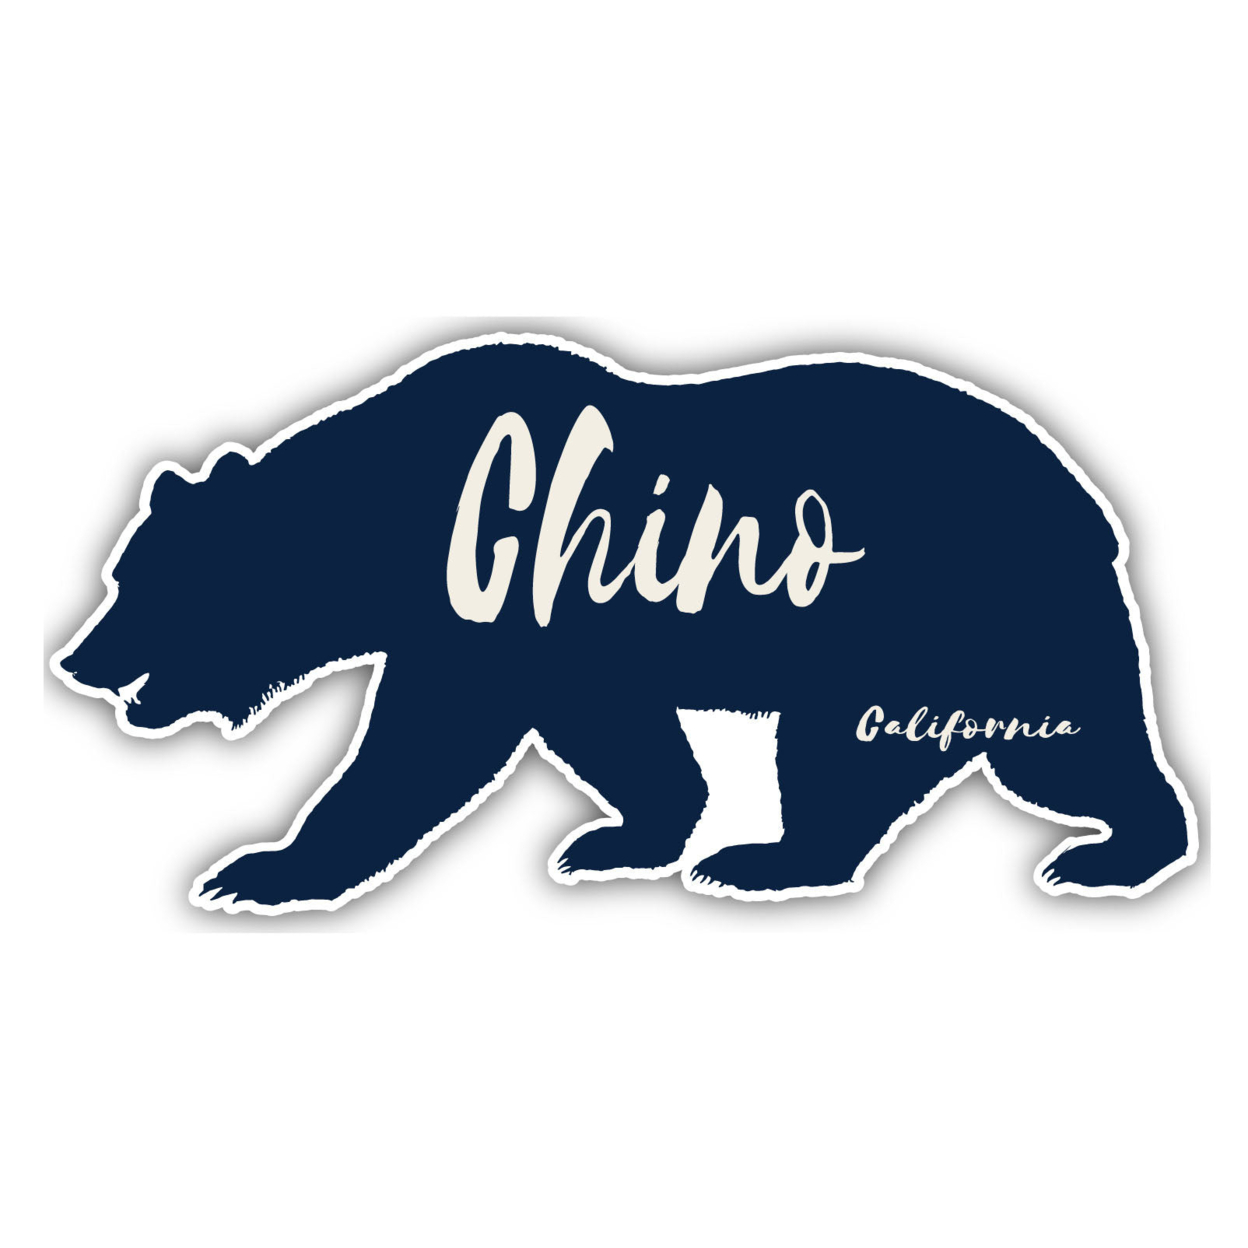 Chino California Souvenir Decorative Stickers (Choose Theme And Size) - 4-Pack, 10-Inch, Bear